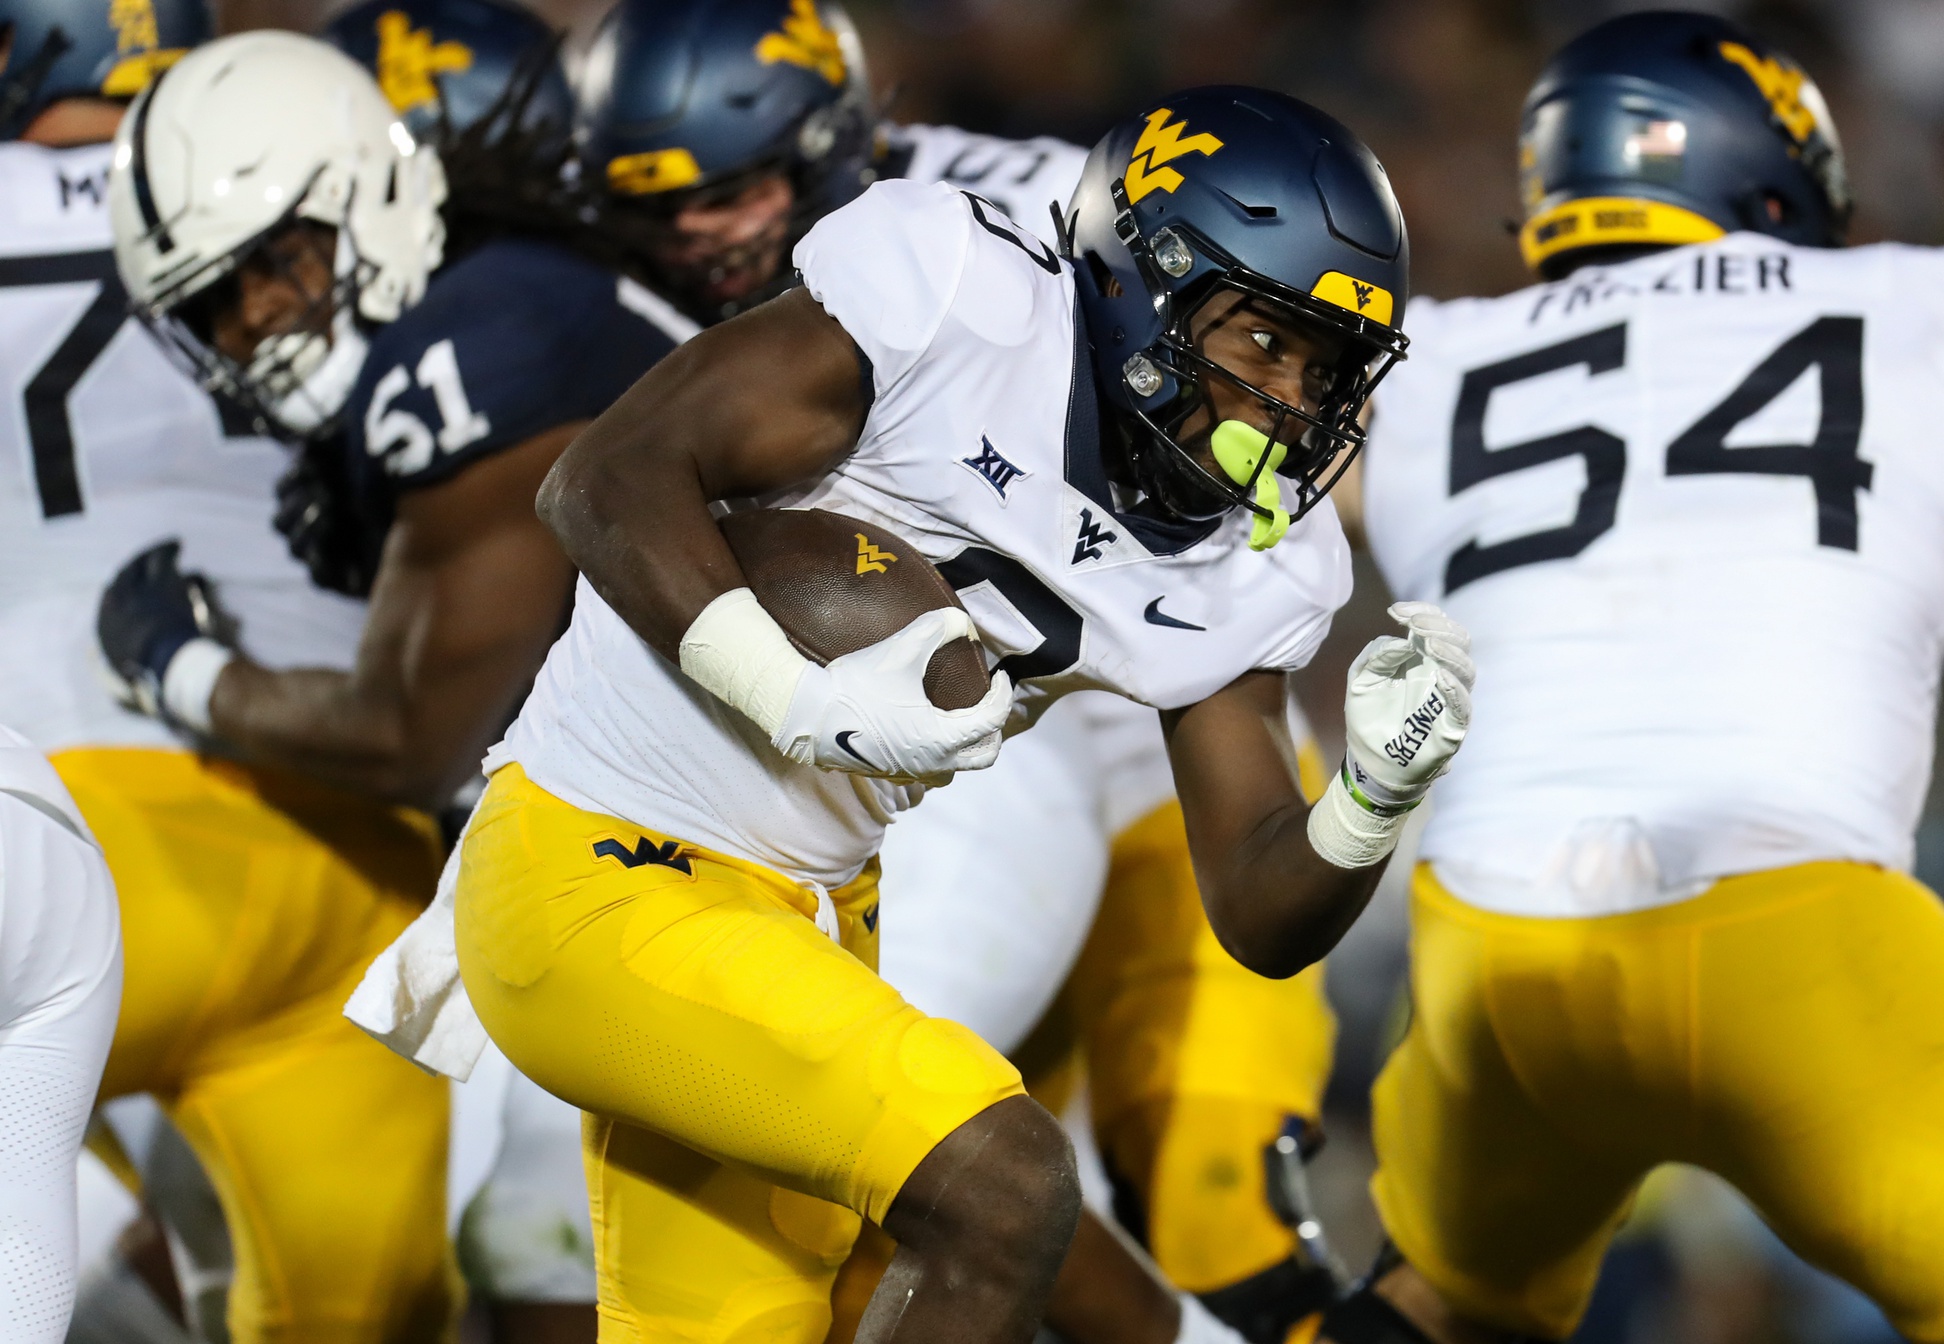 West Virginia Running Backs Looking to Build on Success